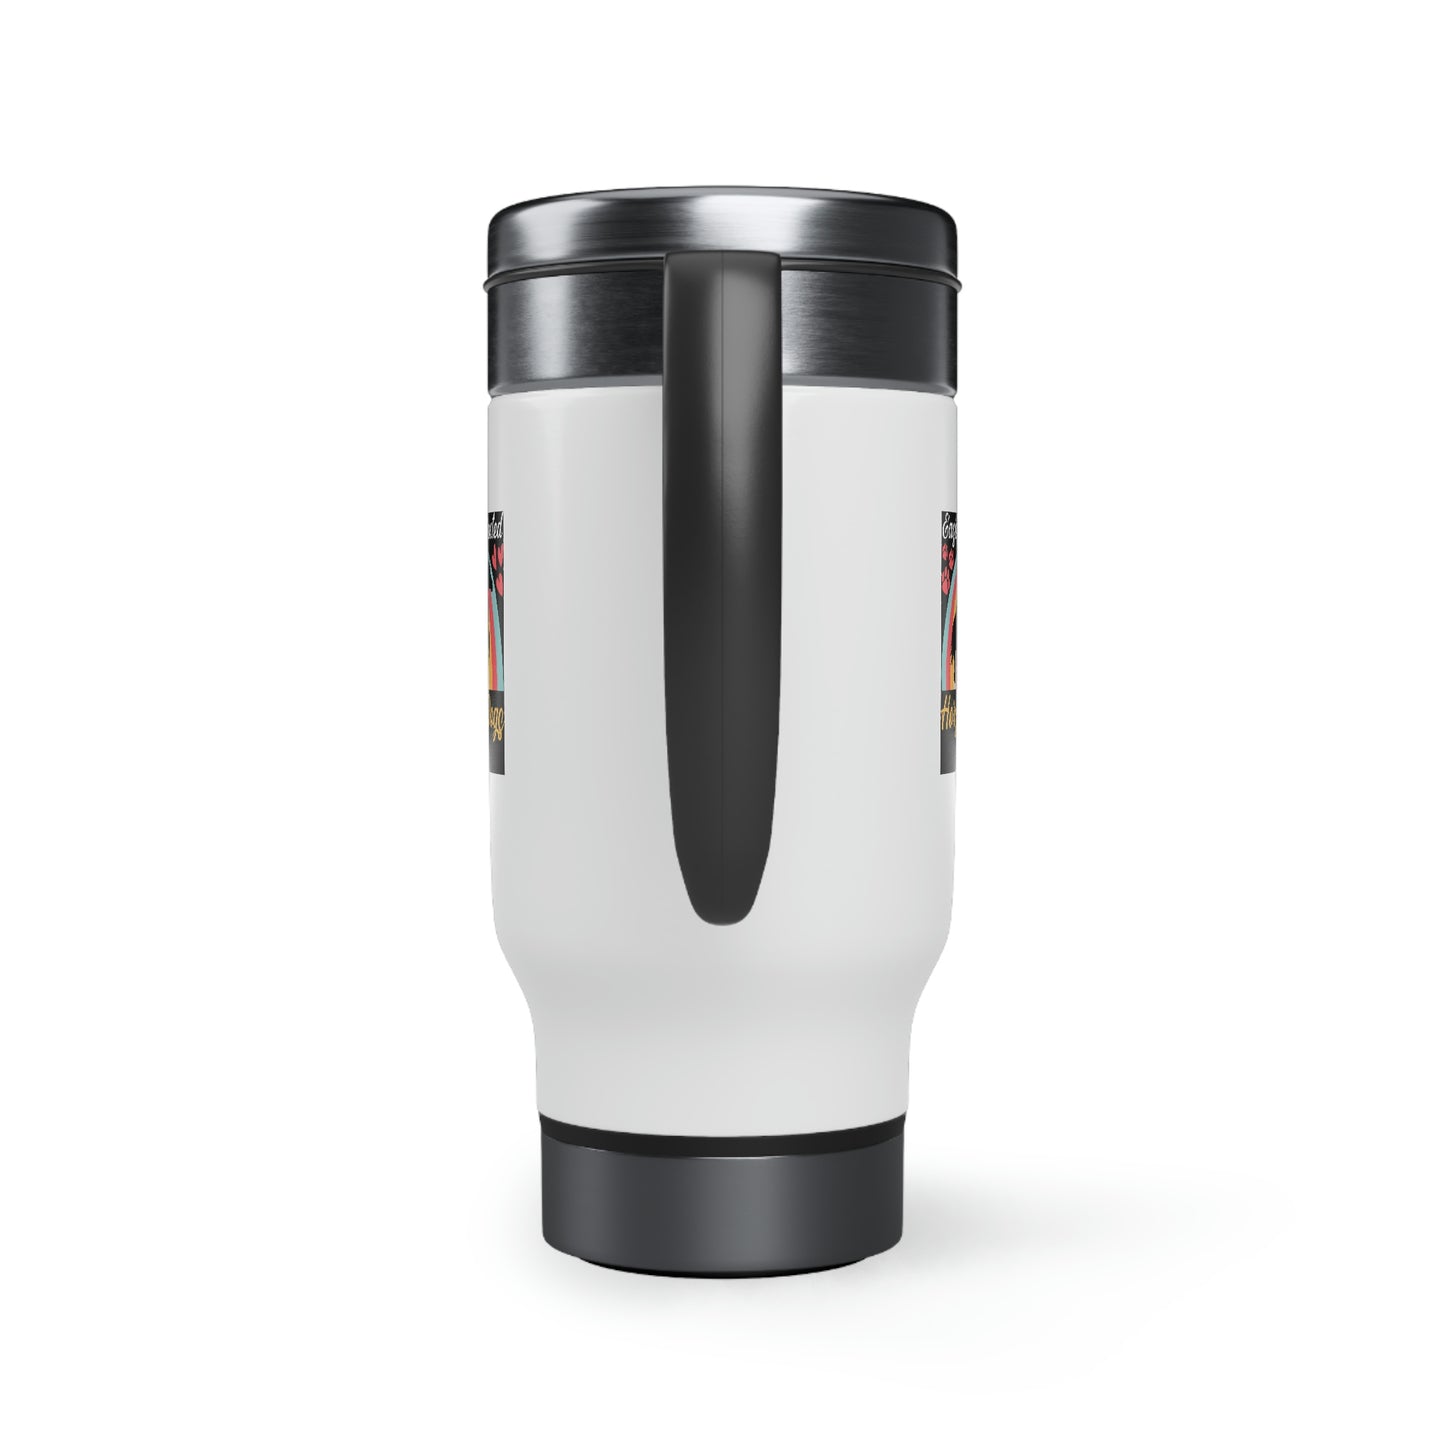 Easily Distracted by Horse and Dogs Stainless Steel Travel Mug with Handle, 14oz